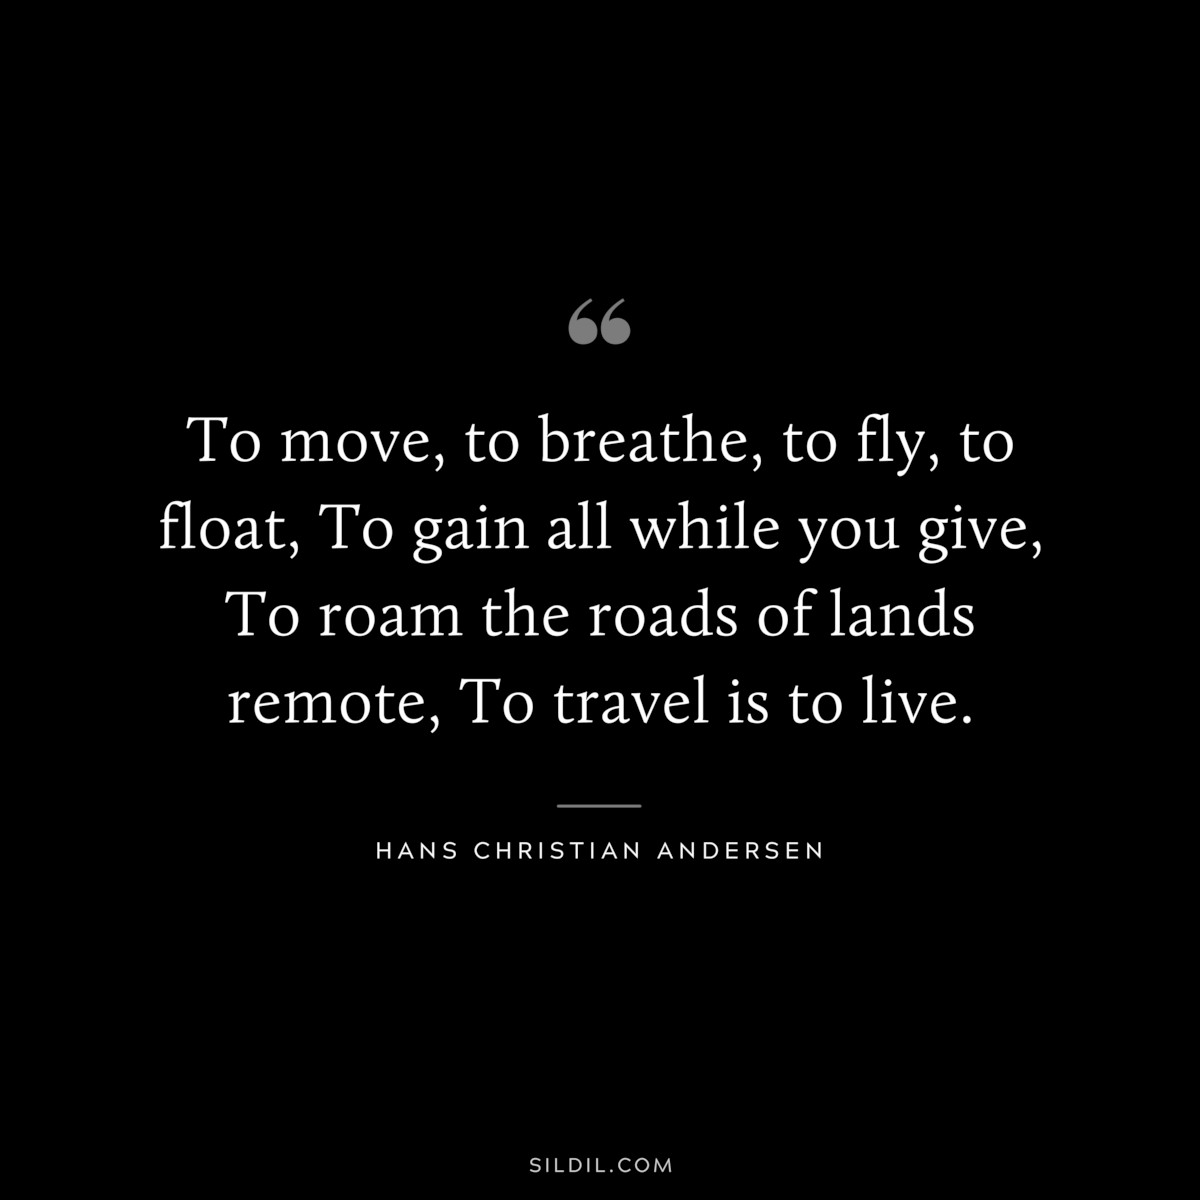 To move, to breathe, to fly, to float, To gain all while you give, To roam the roads of lands remote, To travel is to live. ― Hans Christian Andersen